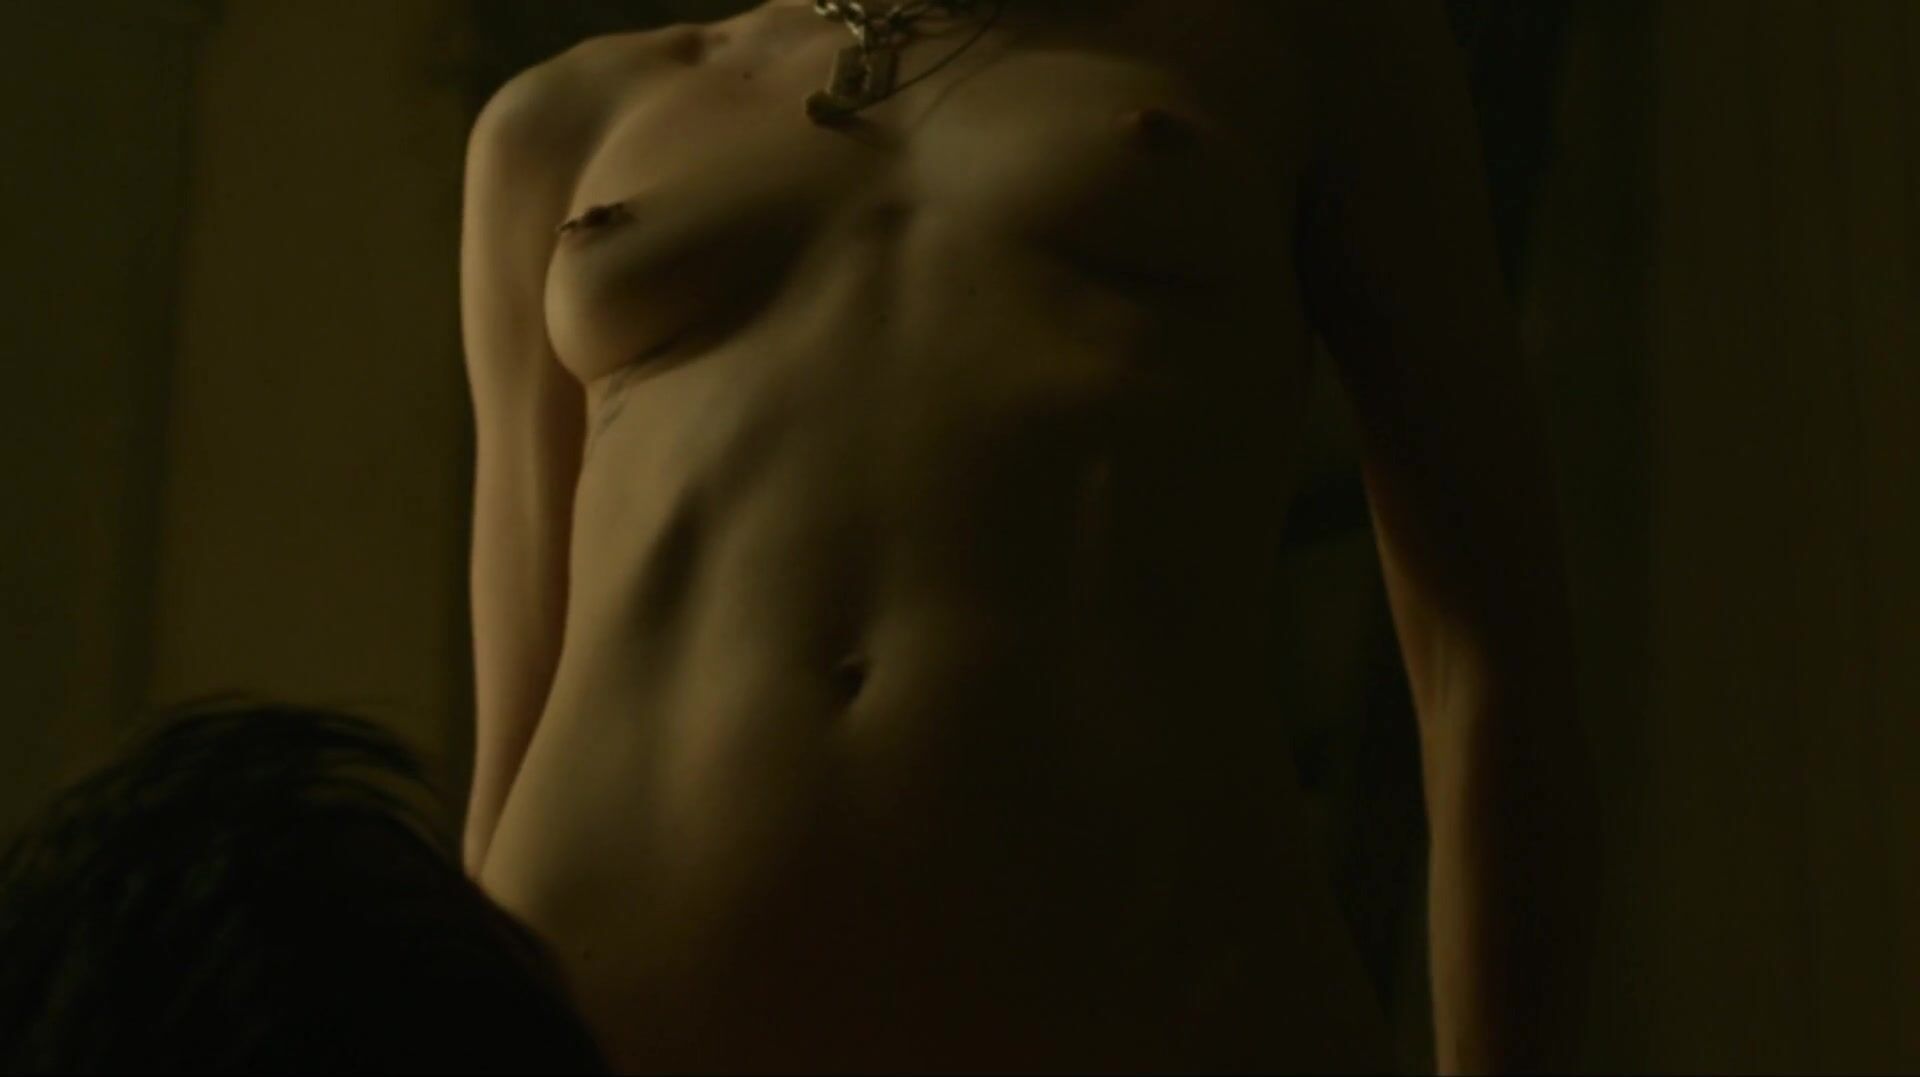 Black Thugs Men hump Rooney Mara with her consent or without it in Girl With The Dragon Tattoo MixBase - 1